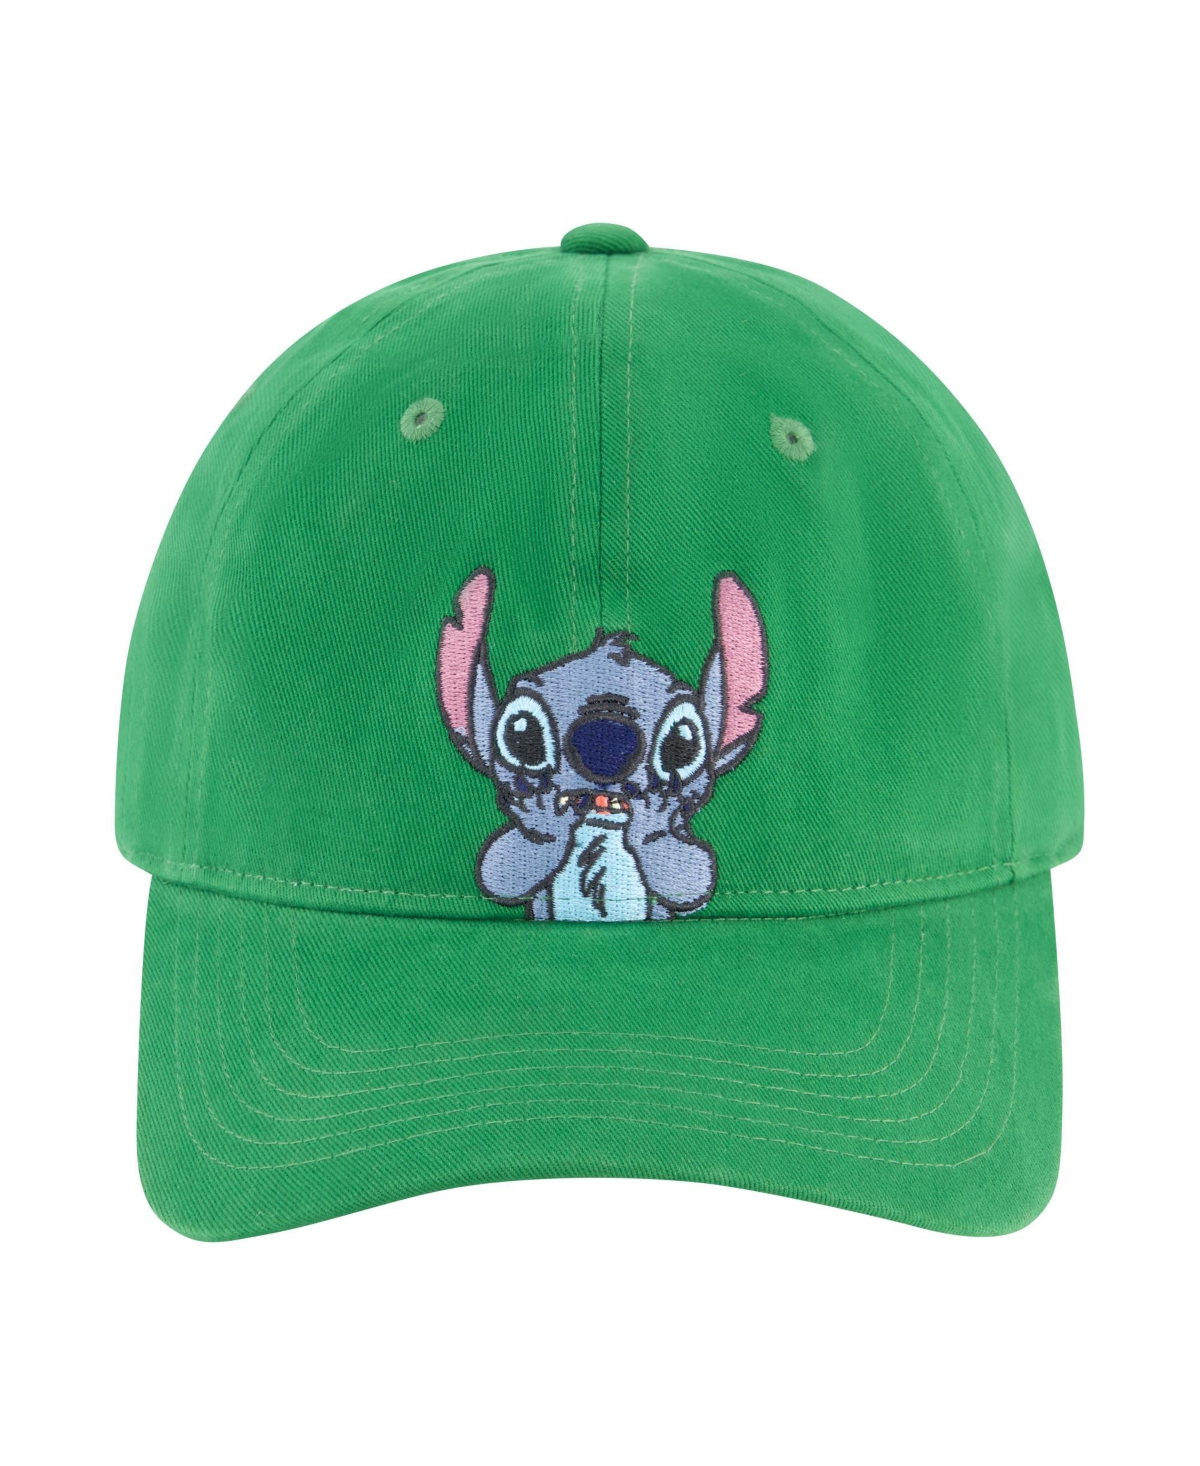 Stitch Hands On Face Peek A Boo Embroidery Dad Cap - Green